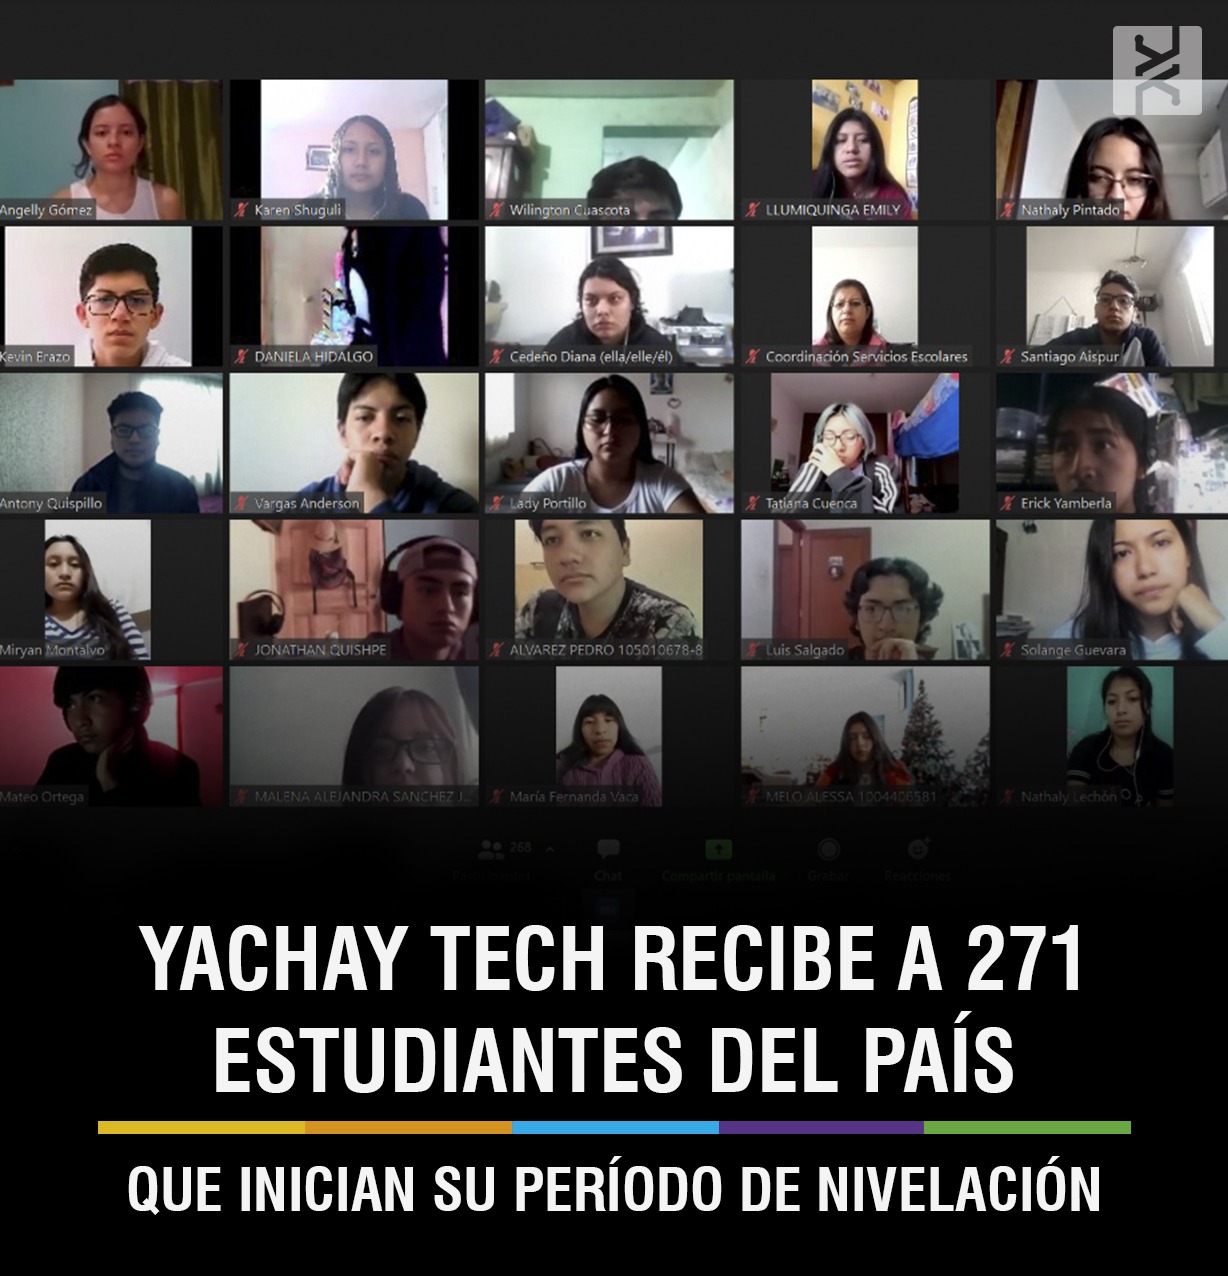 YACHAY TECH WELCOMES 271 STUDENTS FROM ACROSS THE COUNTRY TO THEIR LEVELING PERIOD